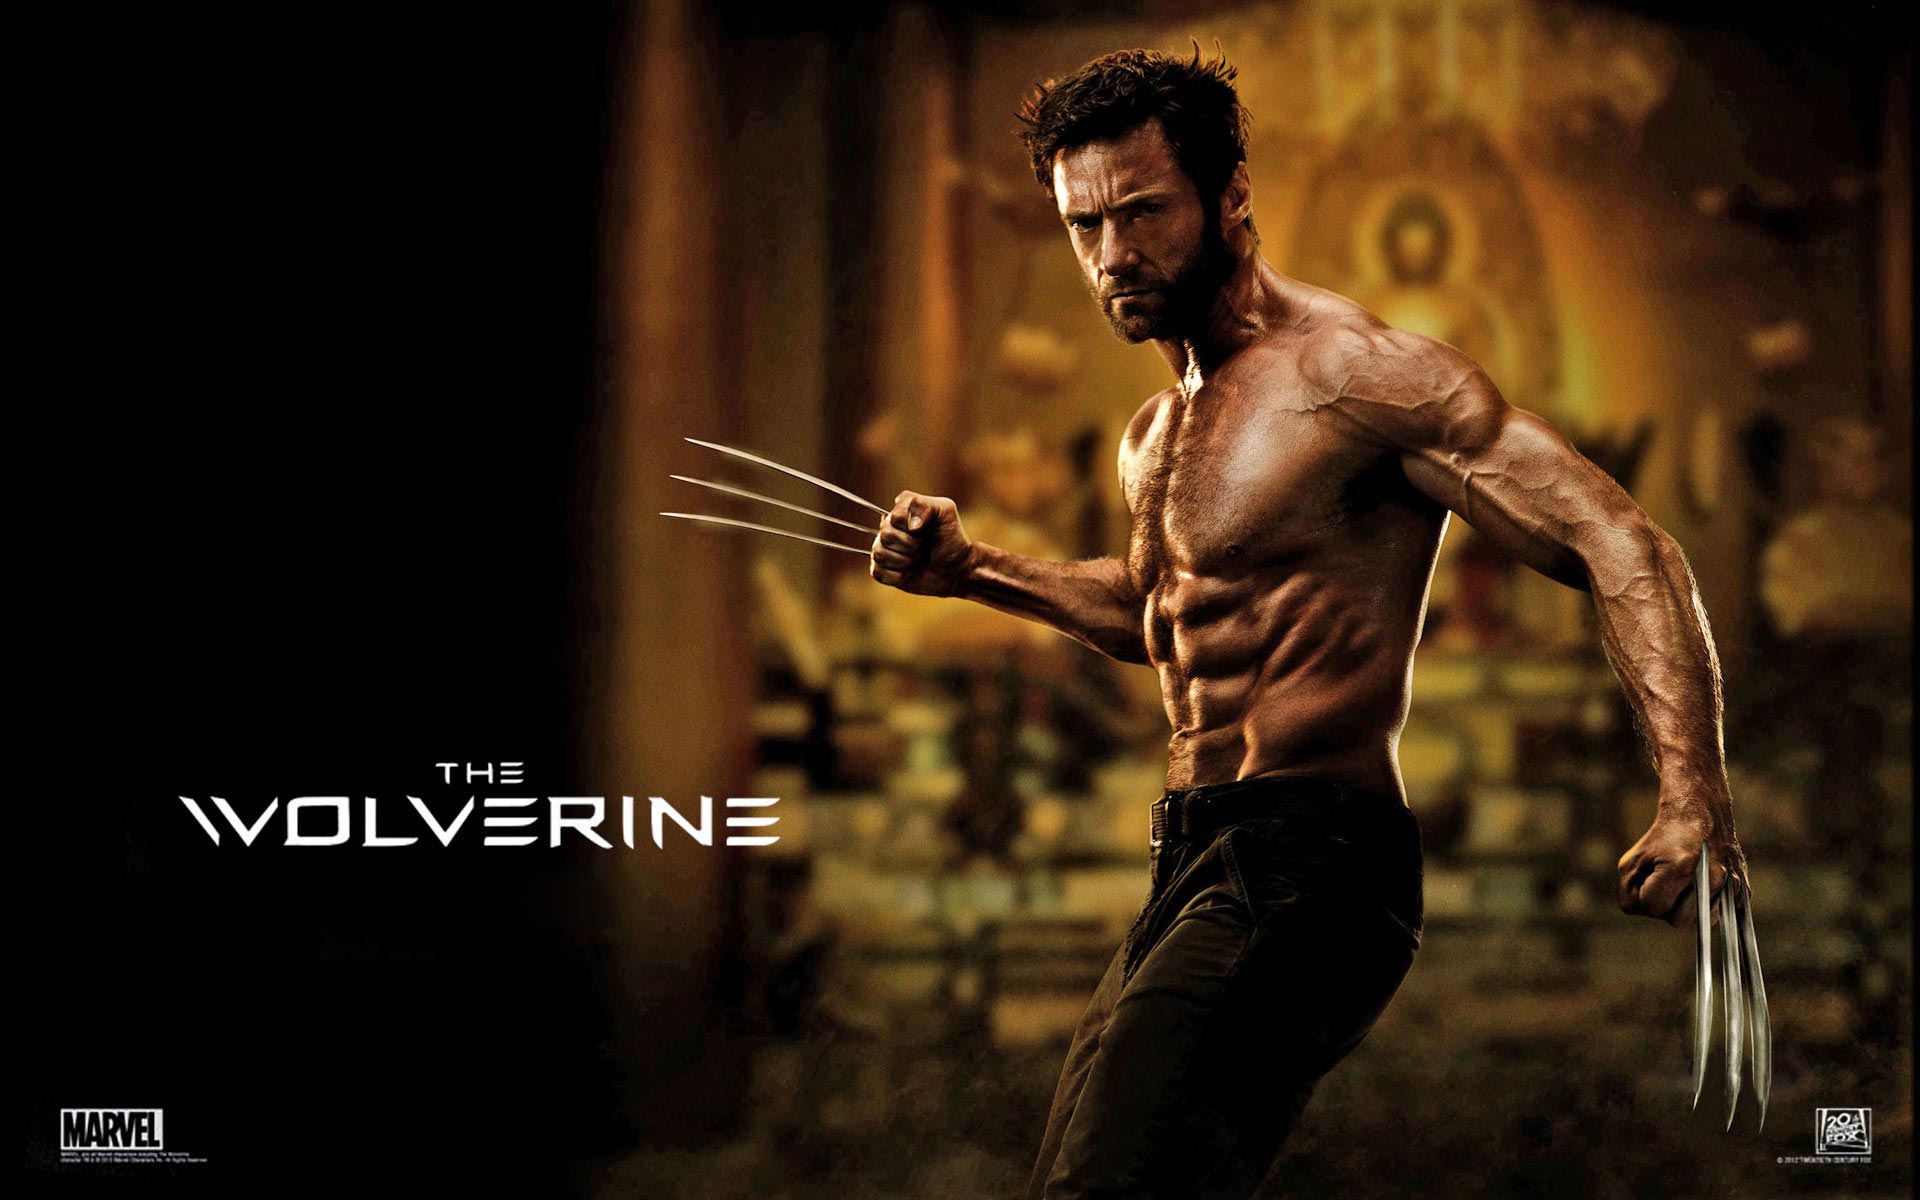 The Latest Wolverine Trailer Looks EPIC